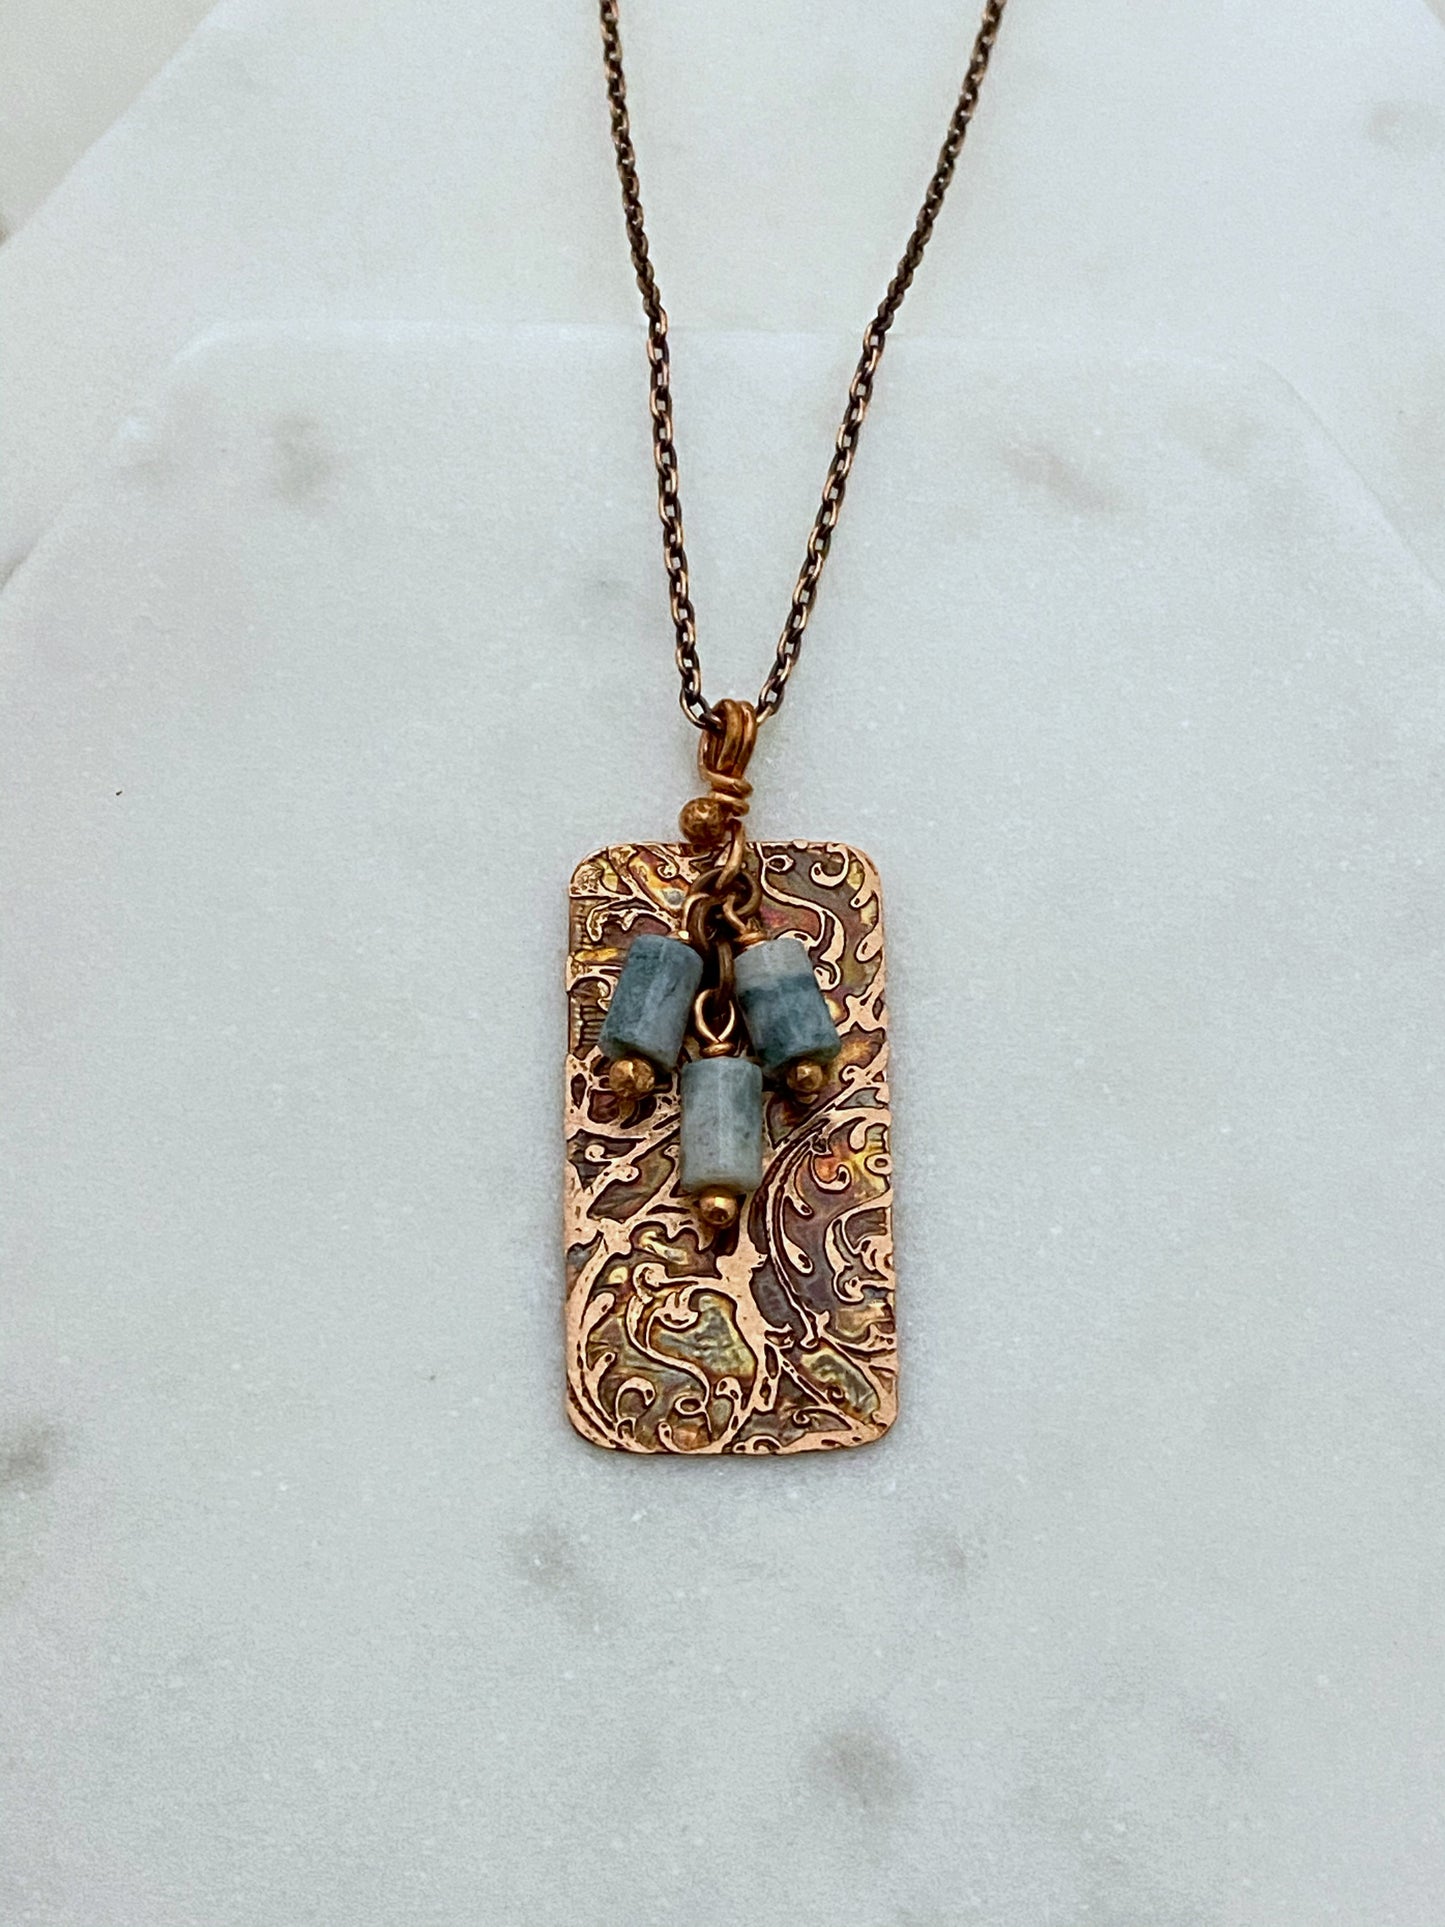 Tree agate and copper necklace